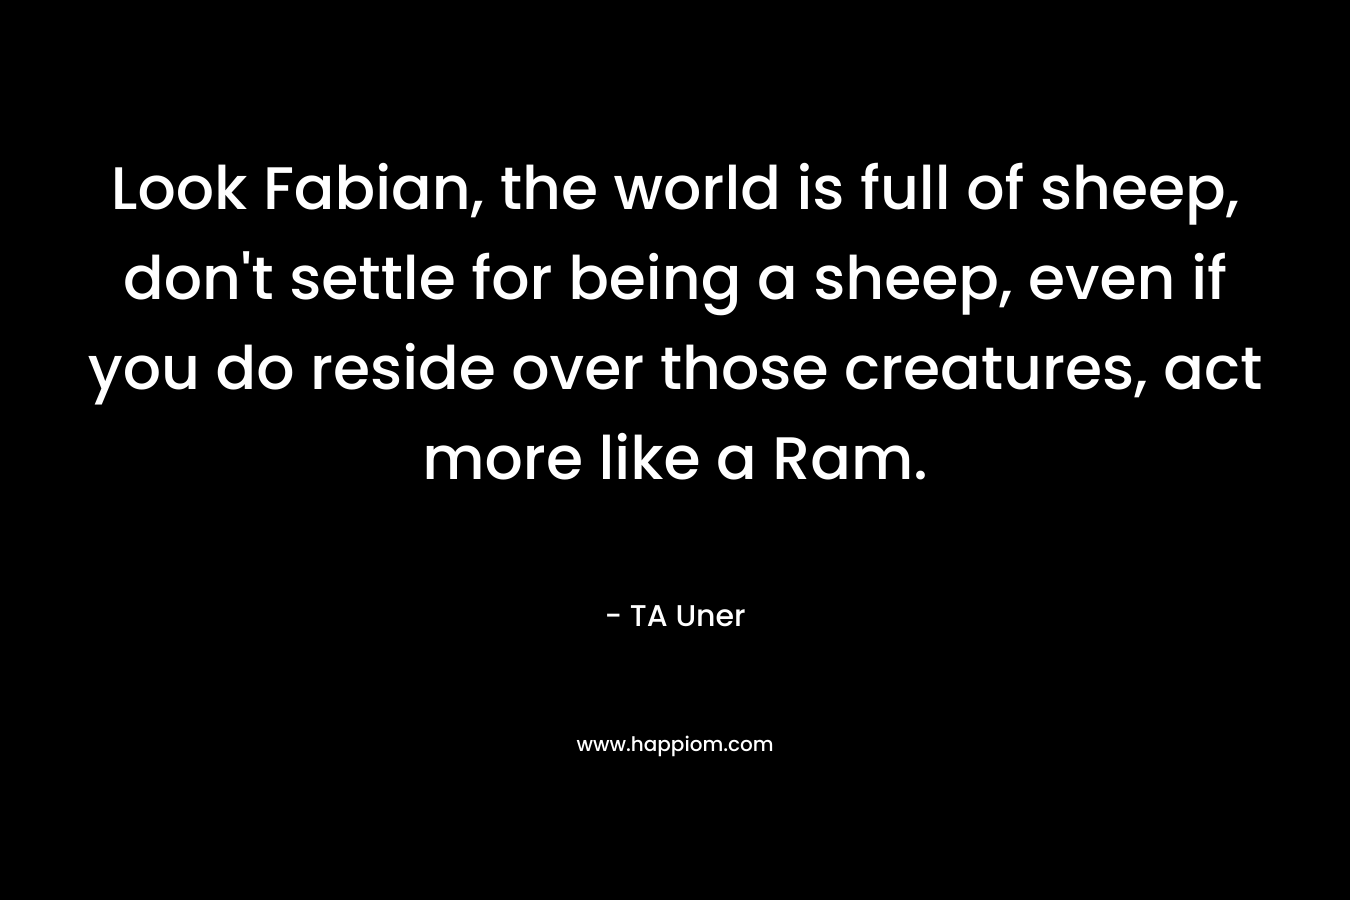 Look Fabian, the world is full of sheep, don’t settle for being a sheep, even if you do reside over those creatures, act more like a Ram. – TA Uner